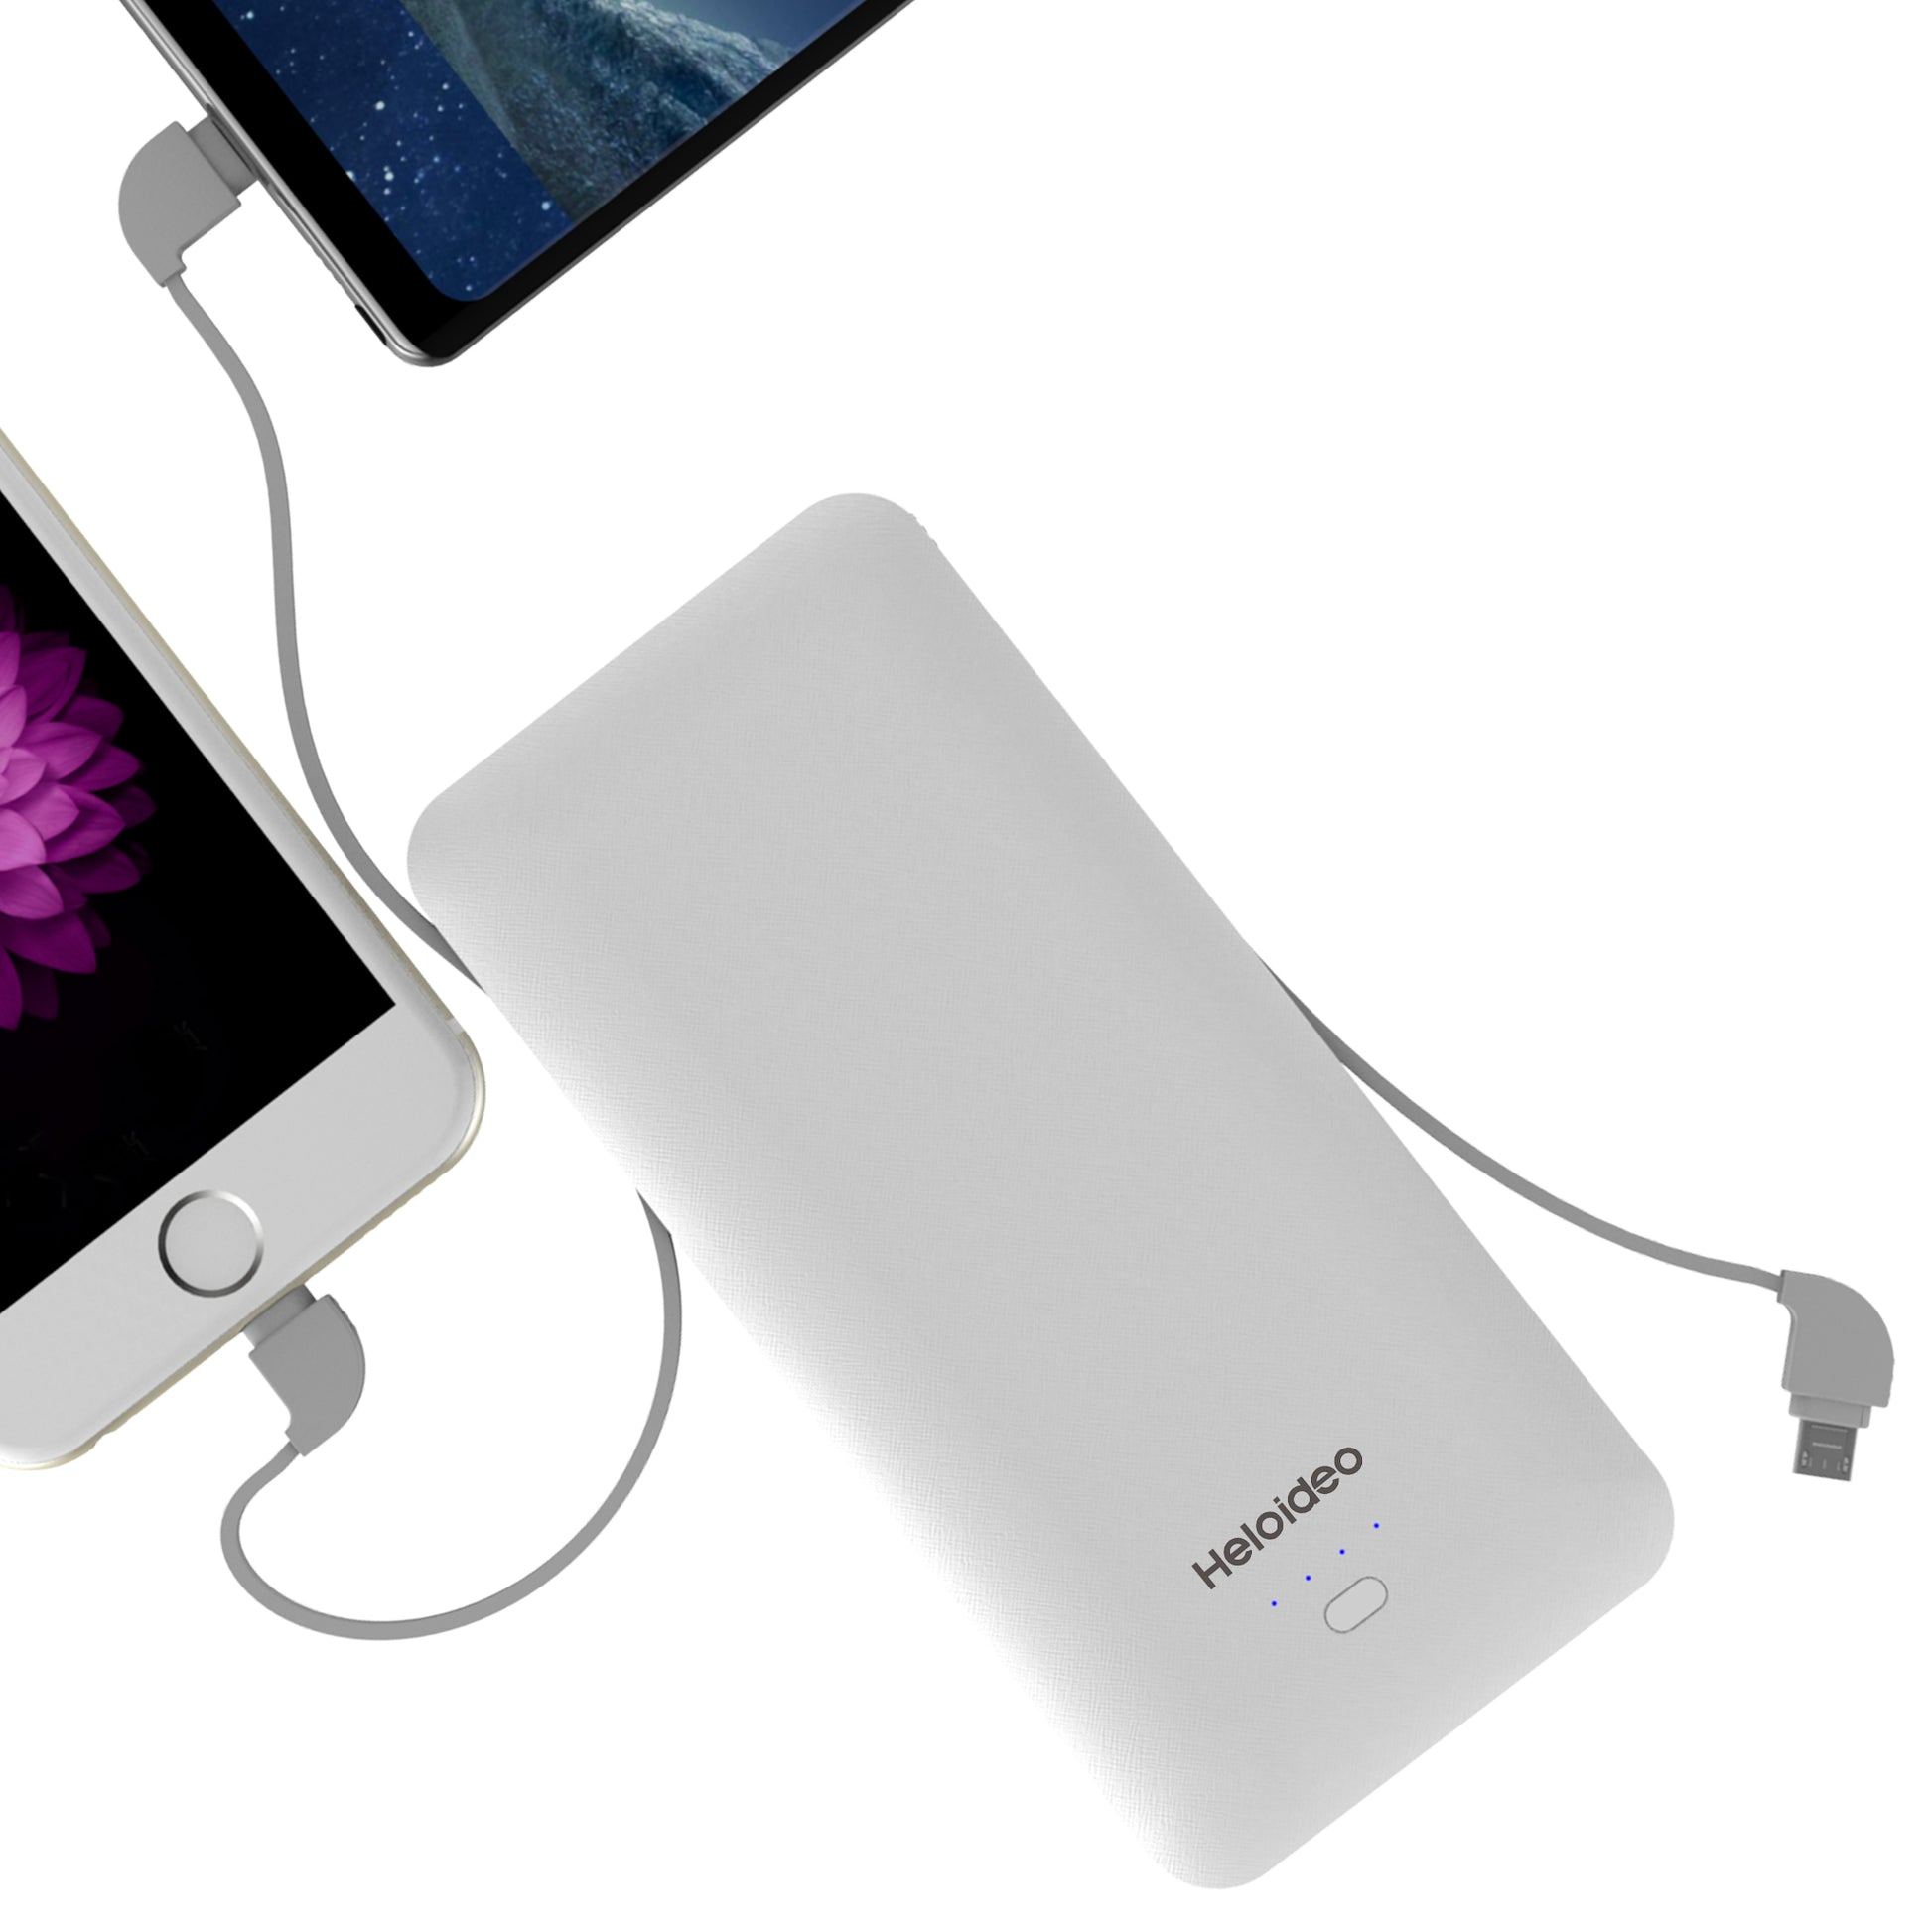 10000mAh Heloideo Slim Portable Charger Compact Power Bank External Battery Pack Charger with Cable Built-in Micro Type-c Three Kinds cable 10000mah for Mobile Phone 📱PB147 ( NO AC outlet） Heloideo